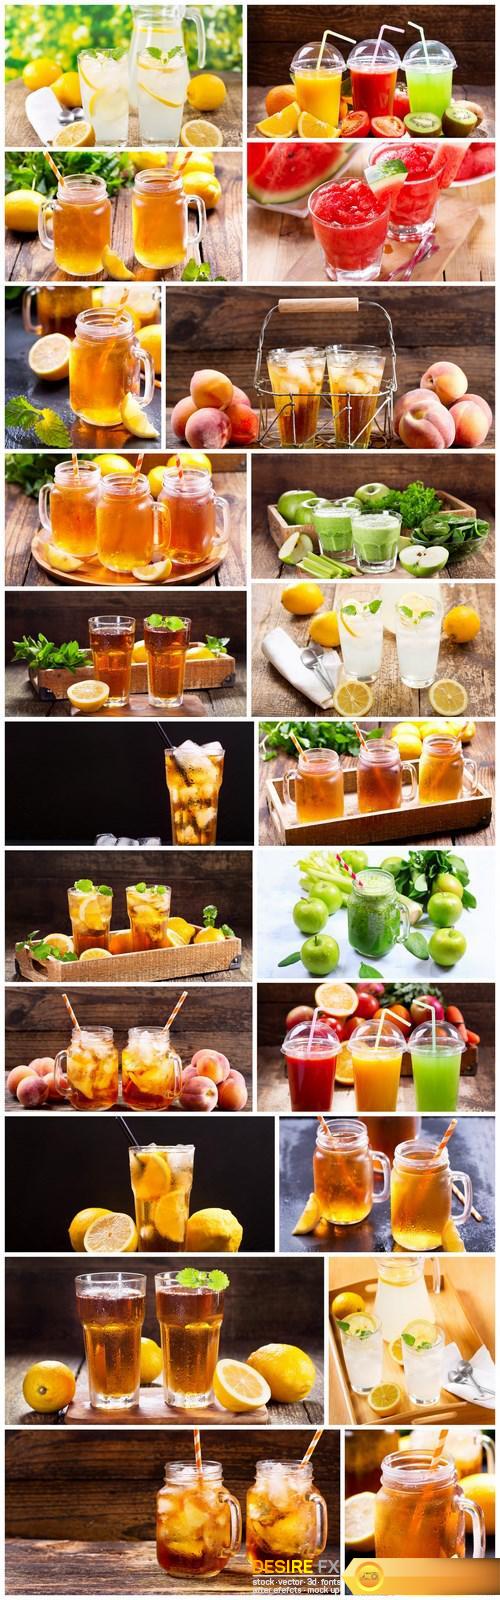 Fresh juices with fruits and vegetables 2 - 22xUHQ JPEG Photo Stock